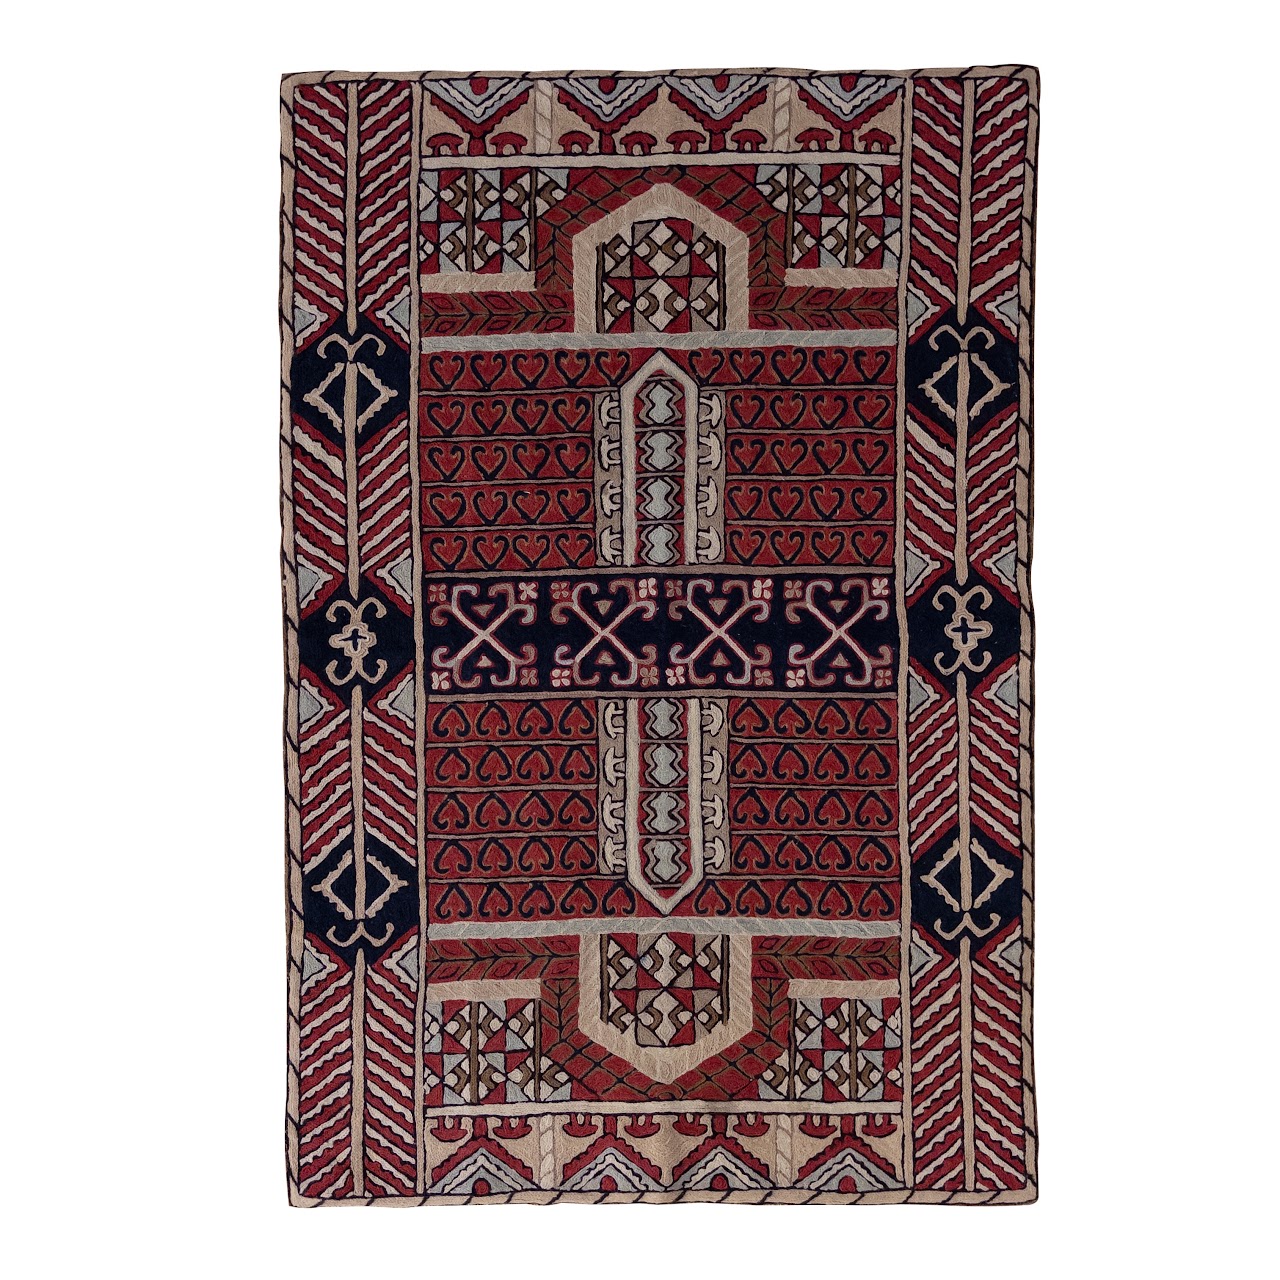 Russian Wool Chain Stitched Area Rug